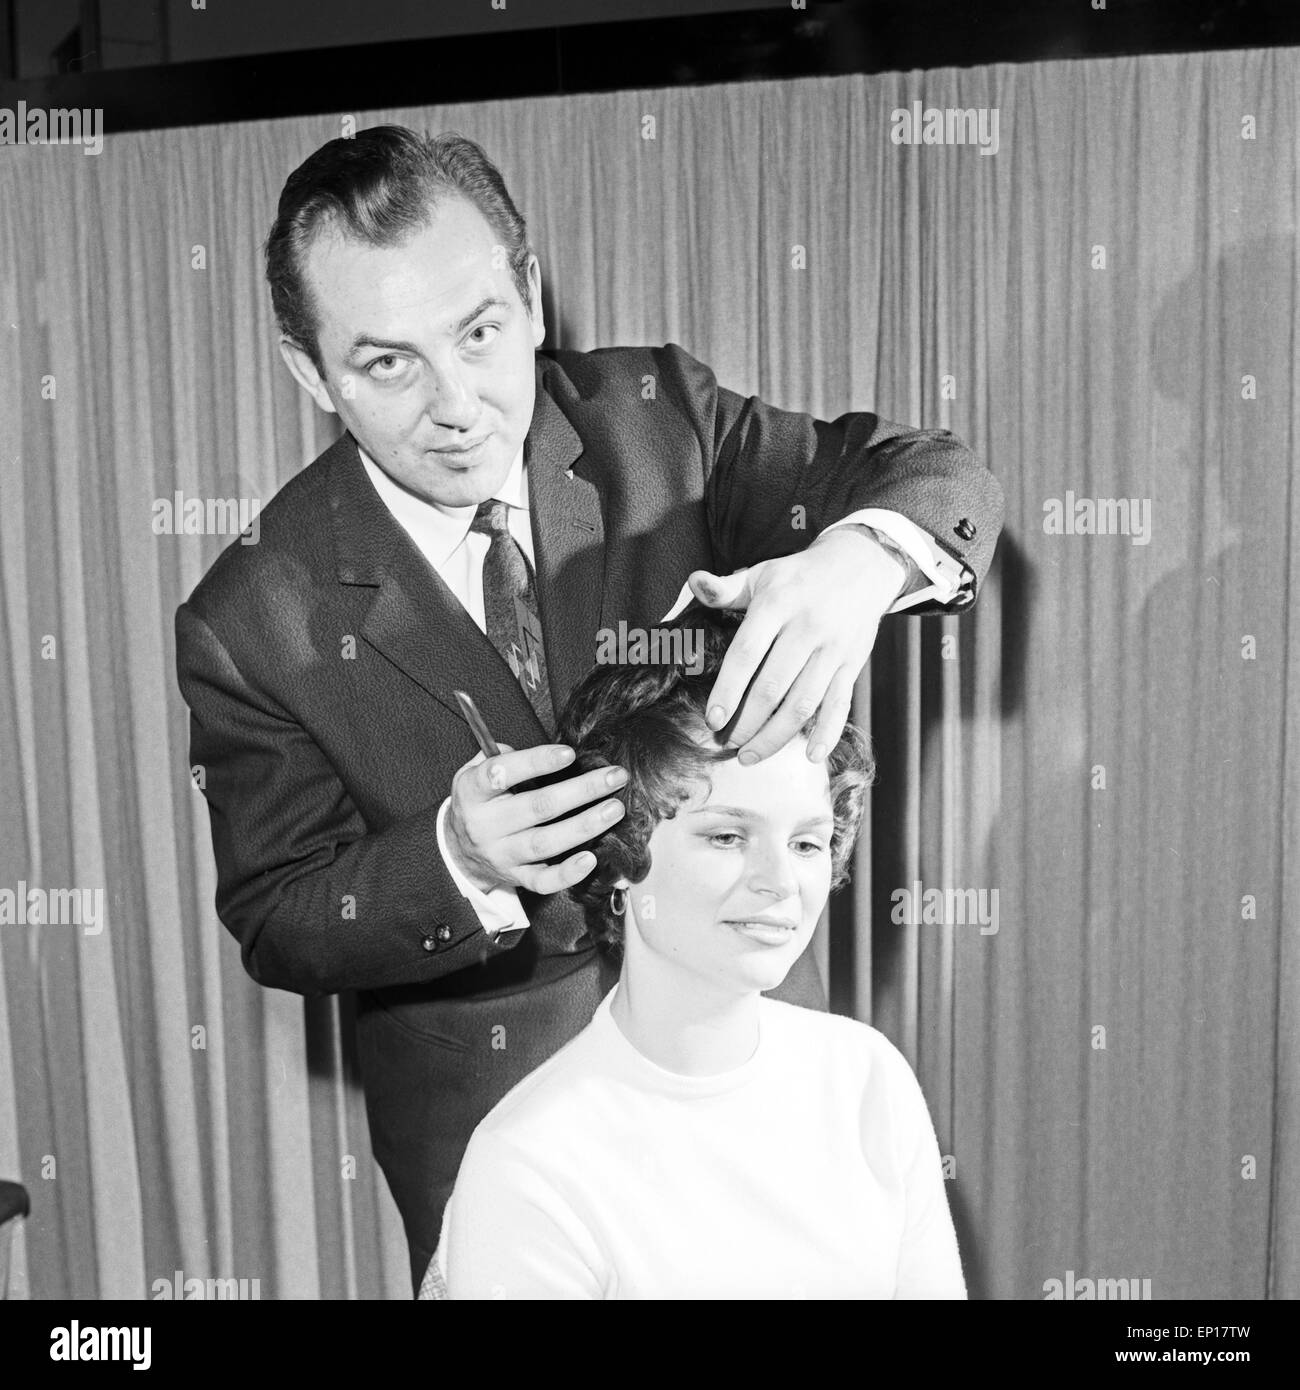 Friseur Black and White Stock Photos & Images - Alamy